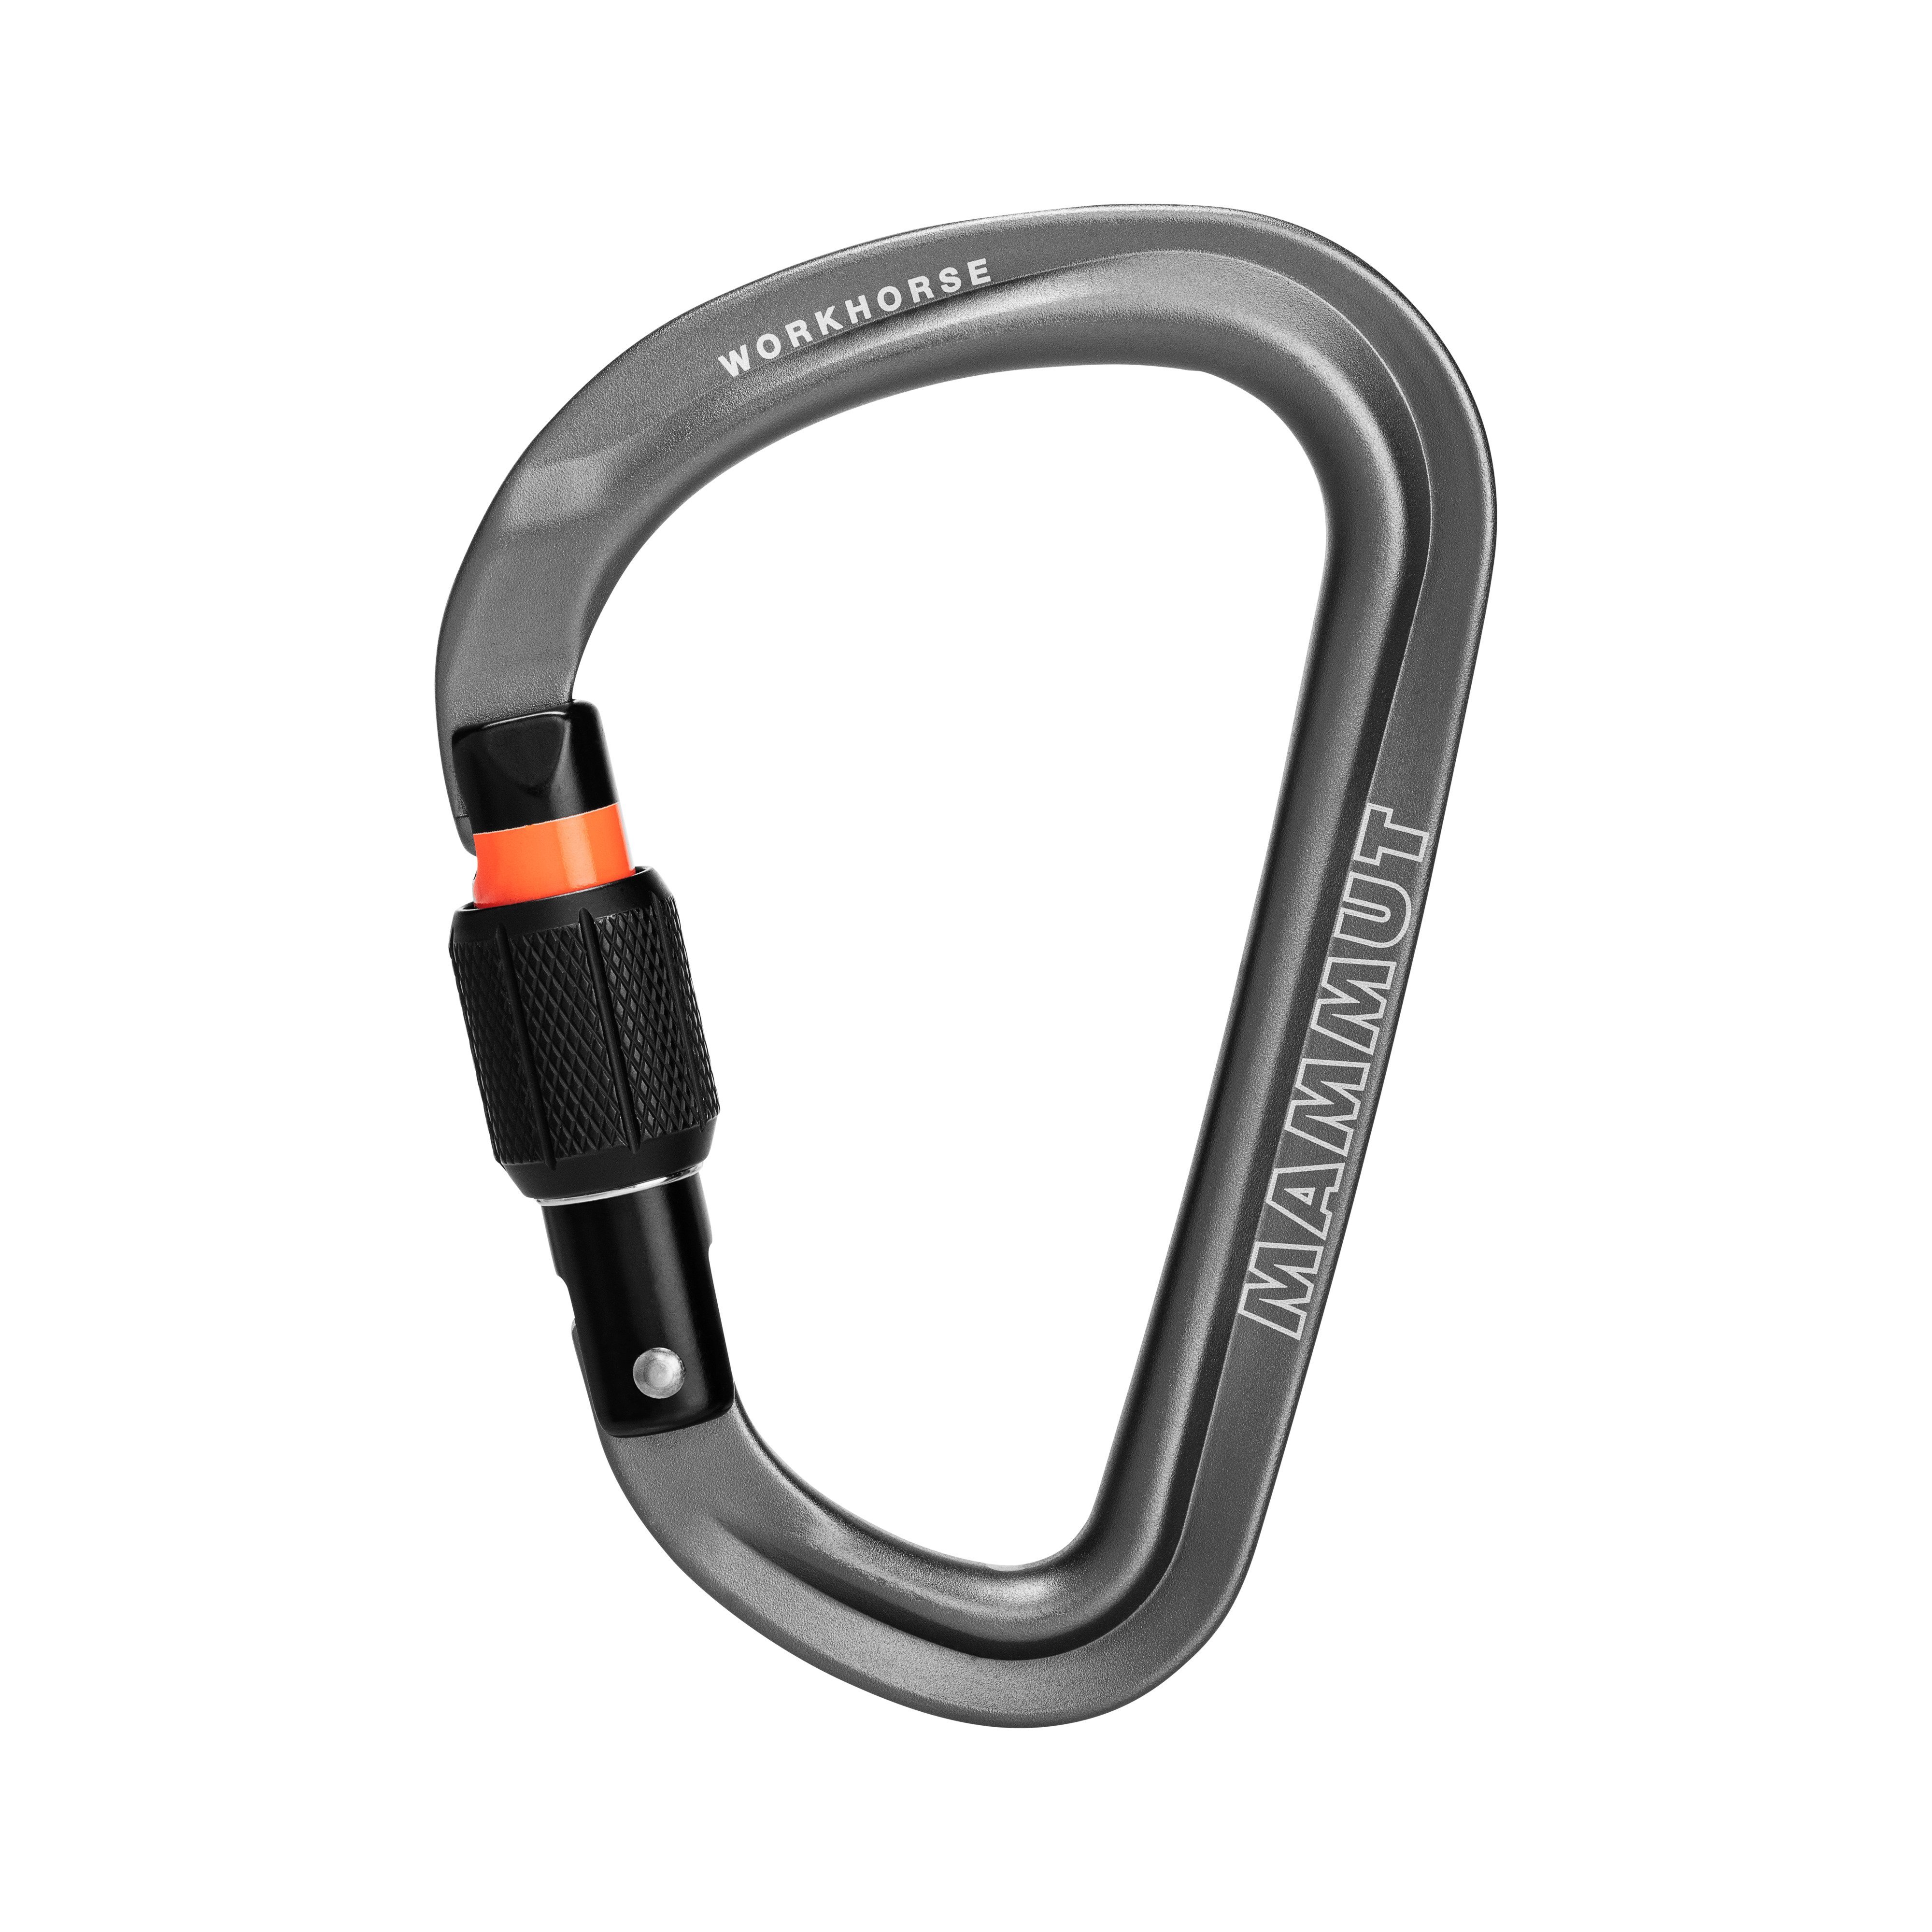 Workhorse HMS Screwgate Carabiner - grey, one size product image